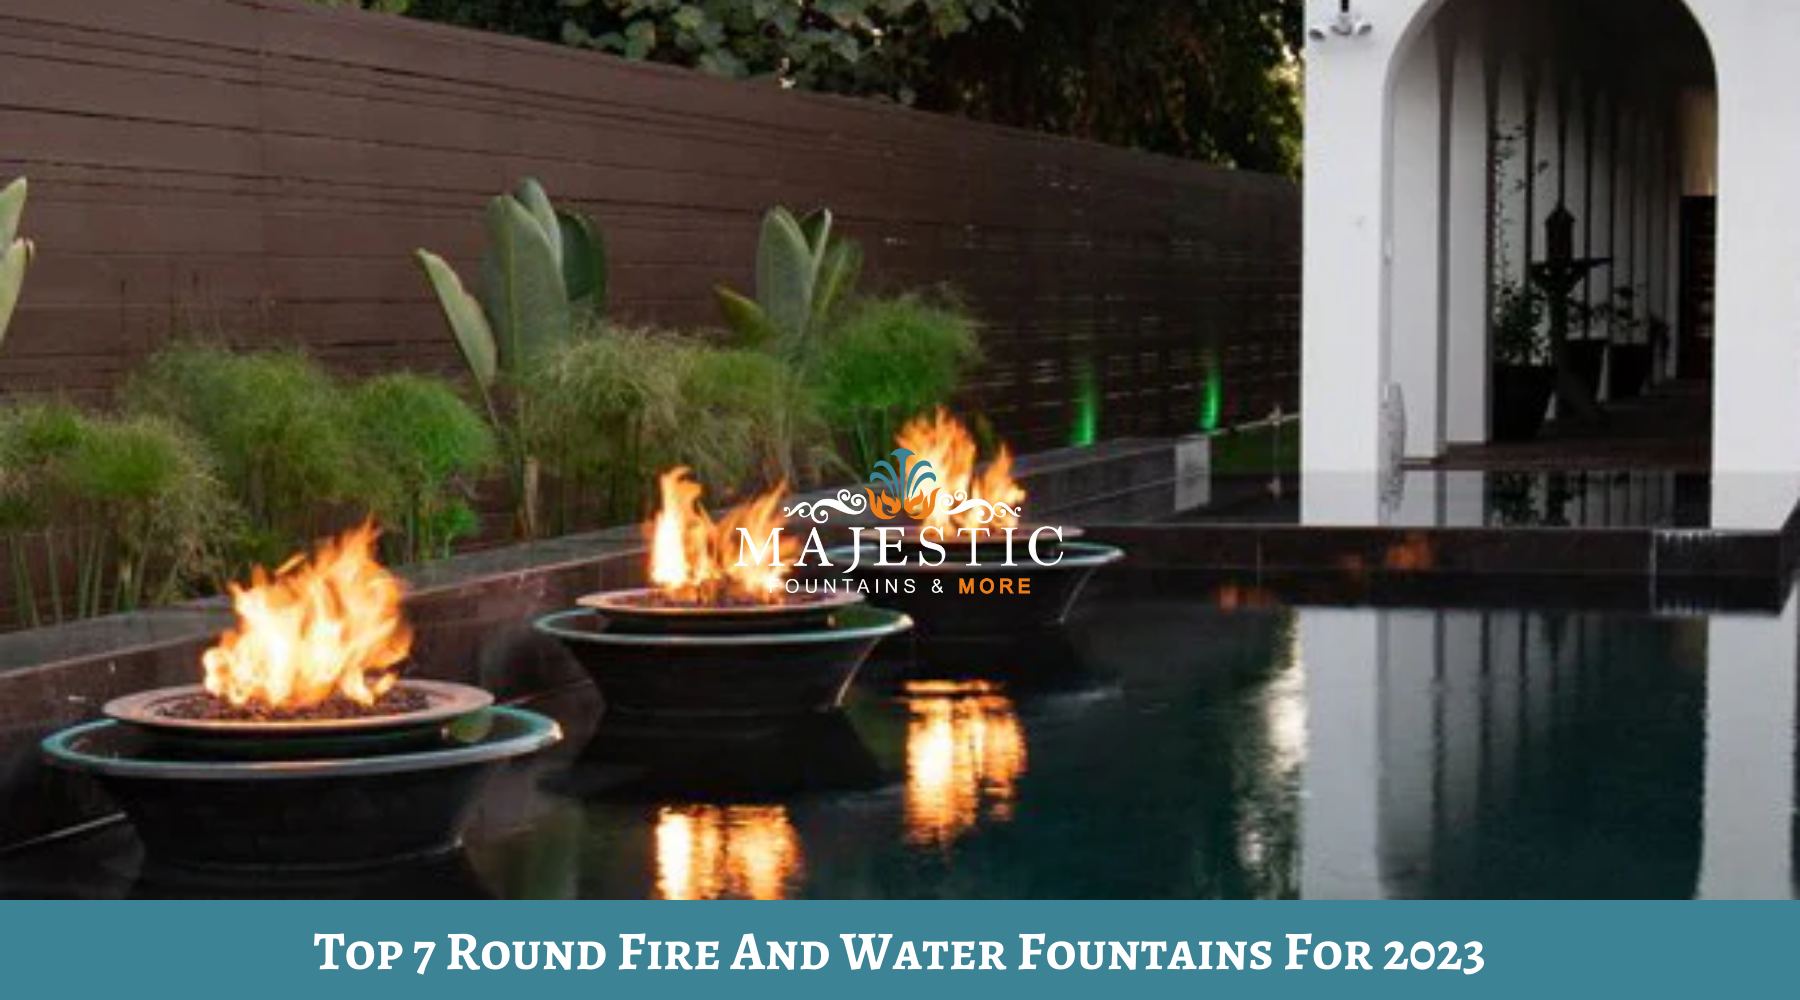 Top 7 Round Fire And Water Fountains For 2023